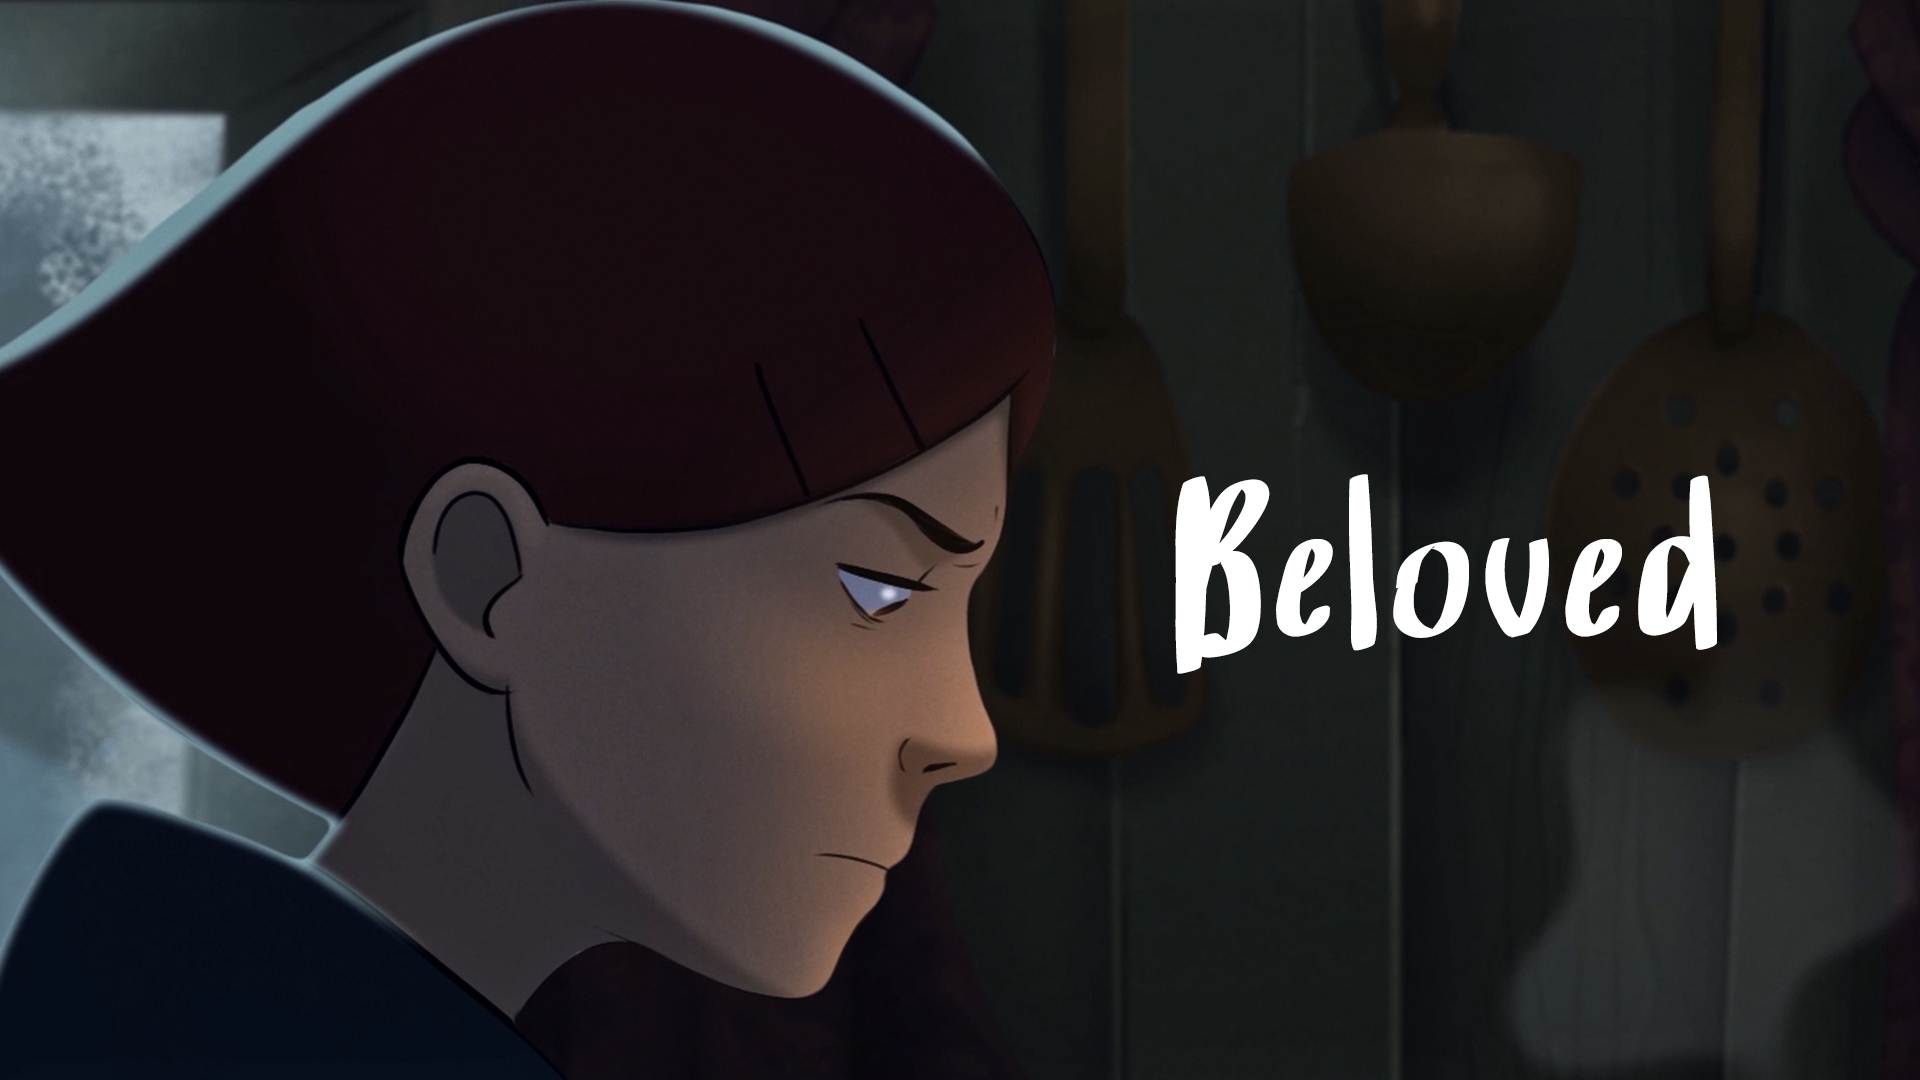 Interviewing Guro and Frida About 'Beloved': Their 2D Animated Short Film -  Reveel